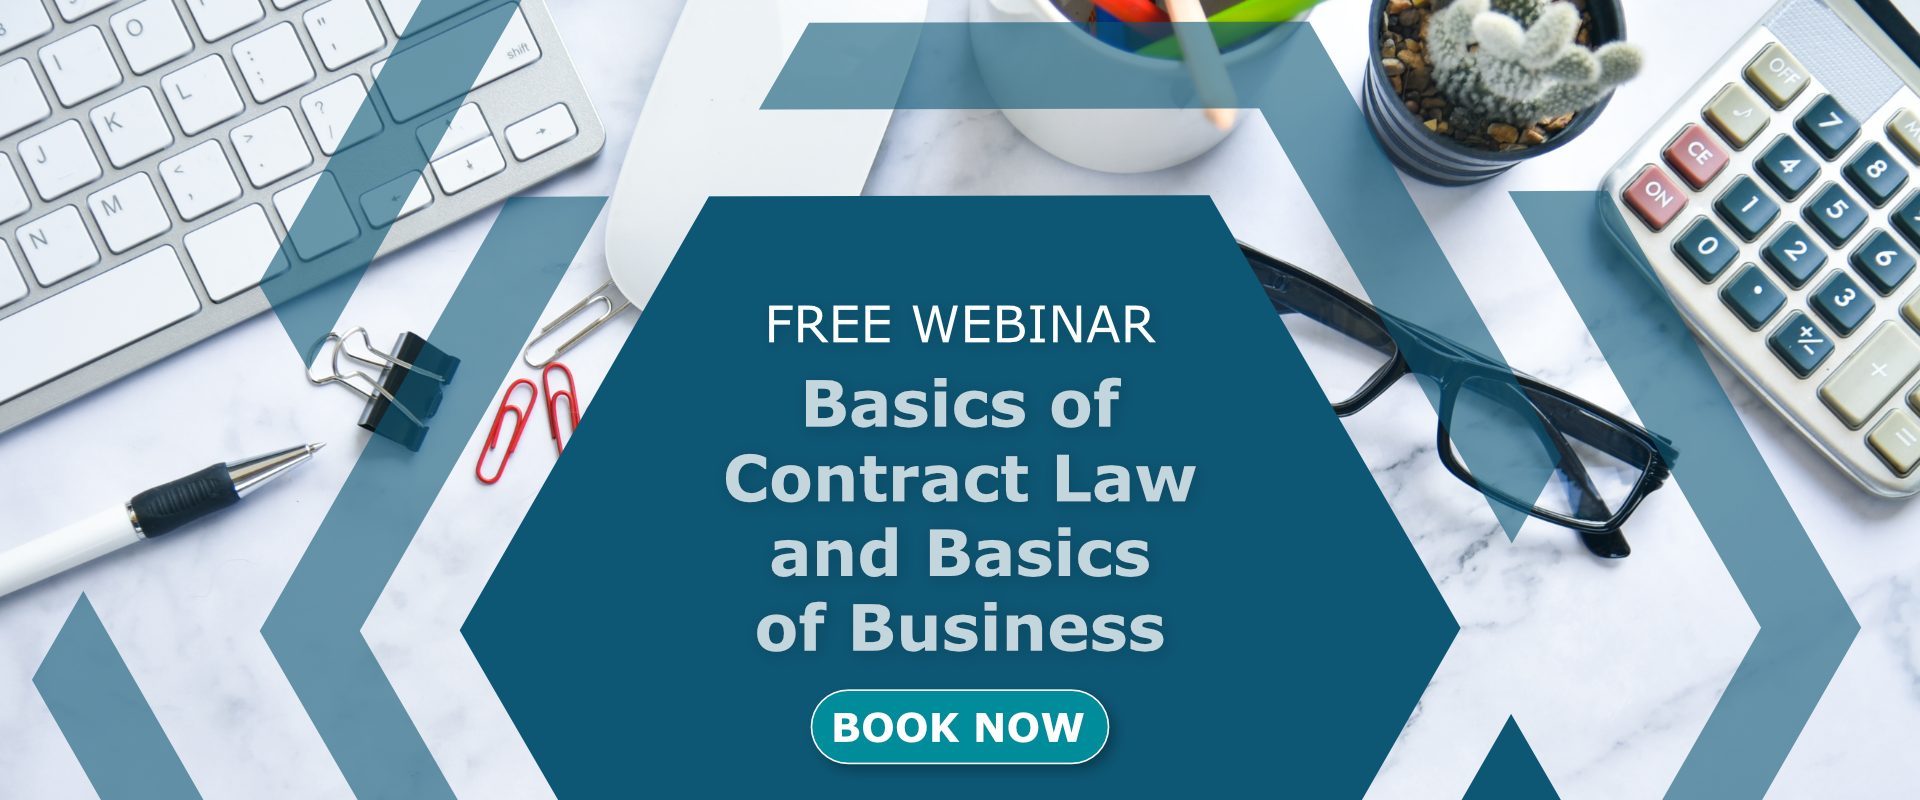 Basics of Contract Law and Basics of Business